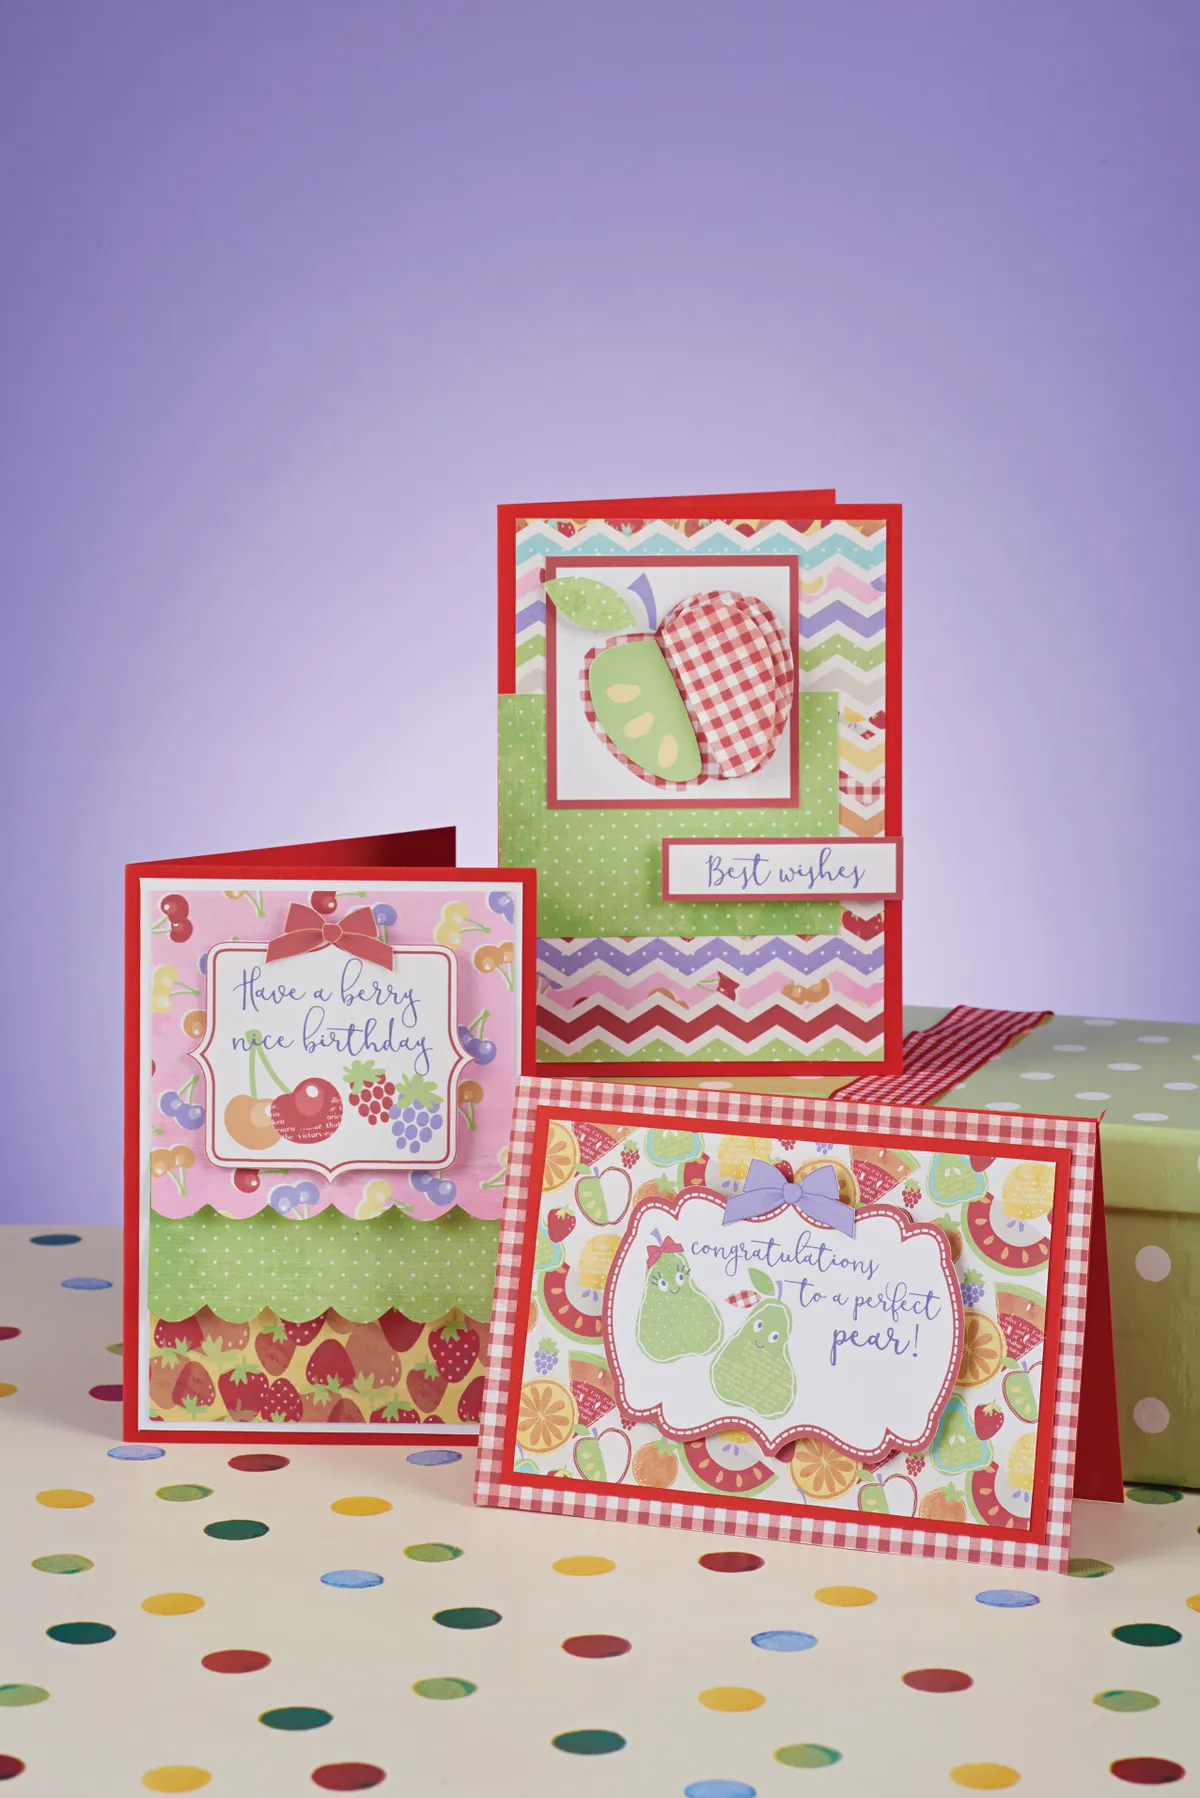 Free gingham check patterned papers for card making